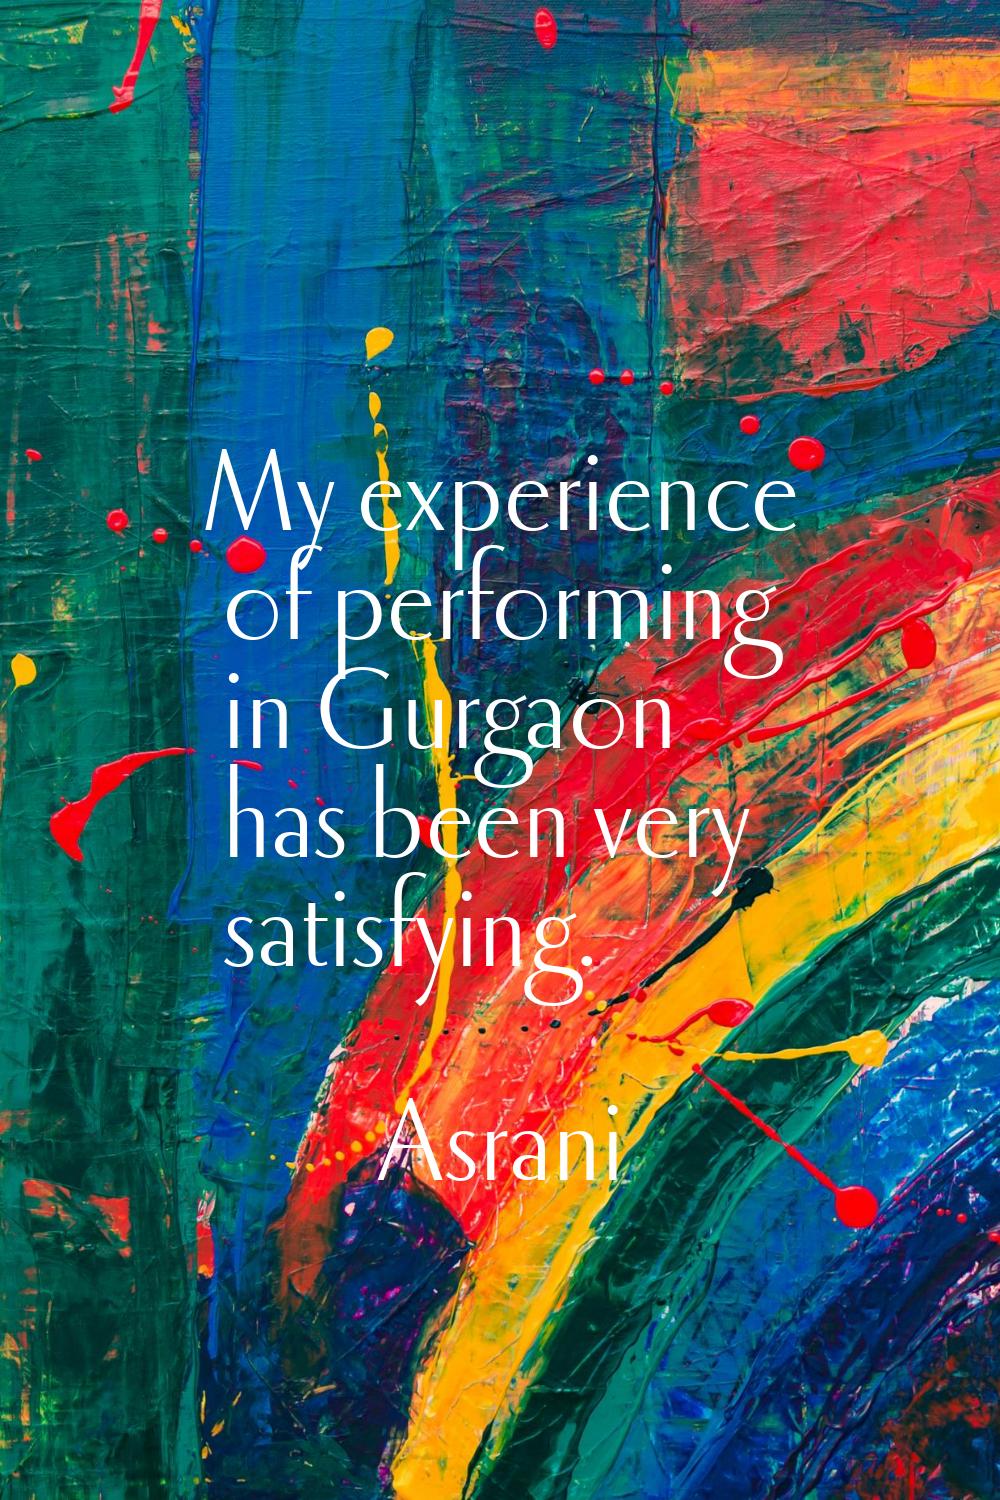 My experience of performing in Gurgaon has been very satisfying.